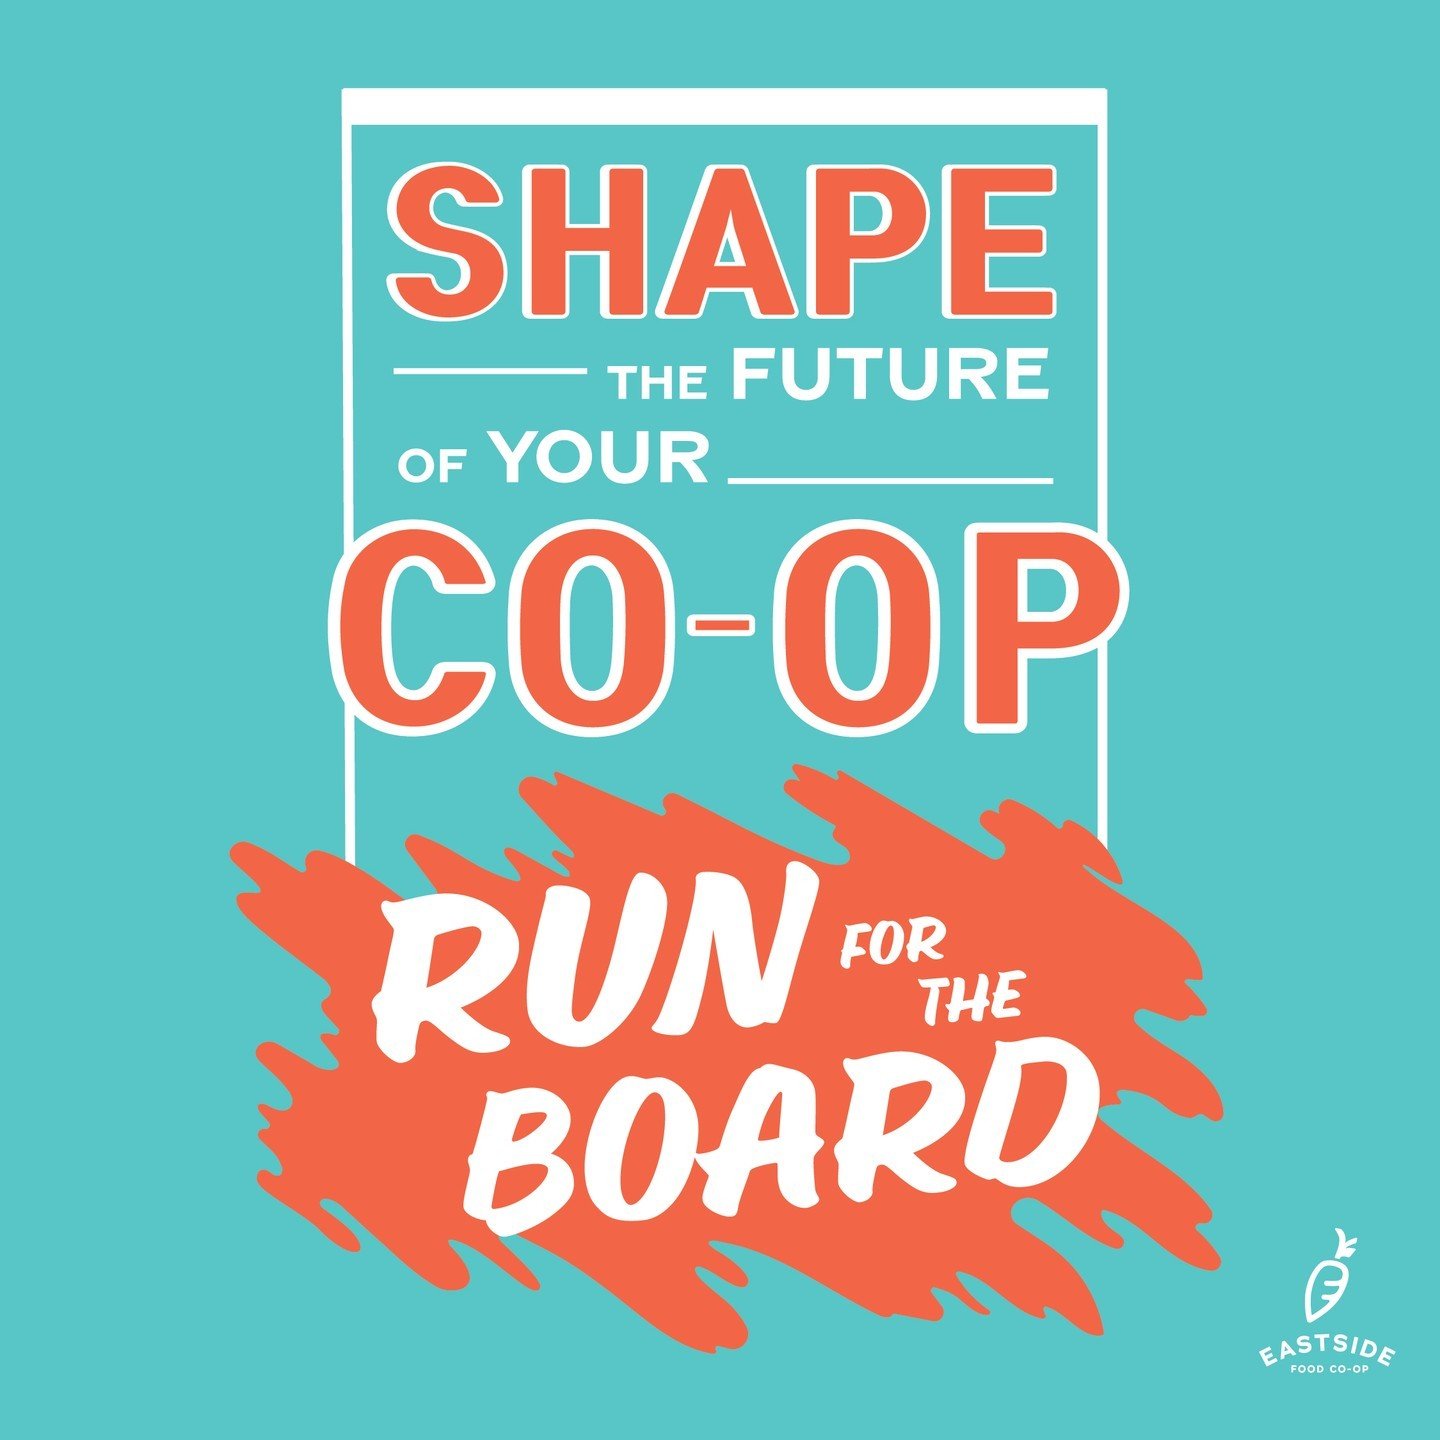 📣 Attention all potential board candidates! Applications are now open! Check out the Board Candidate Packet to learn more about the expectations, roles, and responsibilities of board members. Head over to eastsidefood.coop/board to apply. Contact th